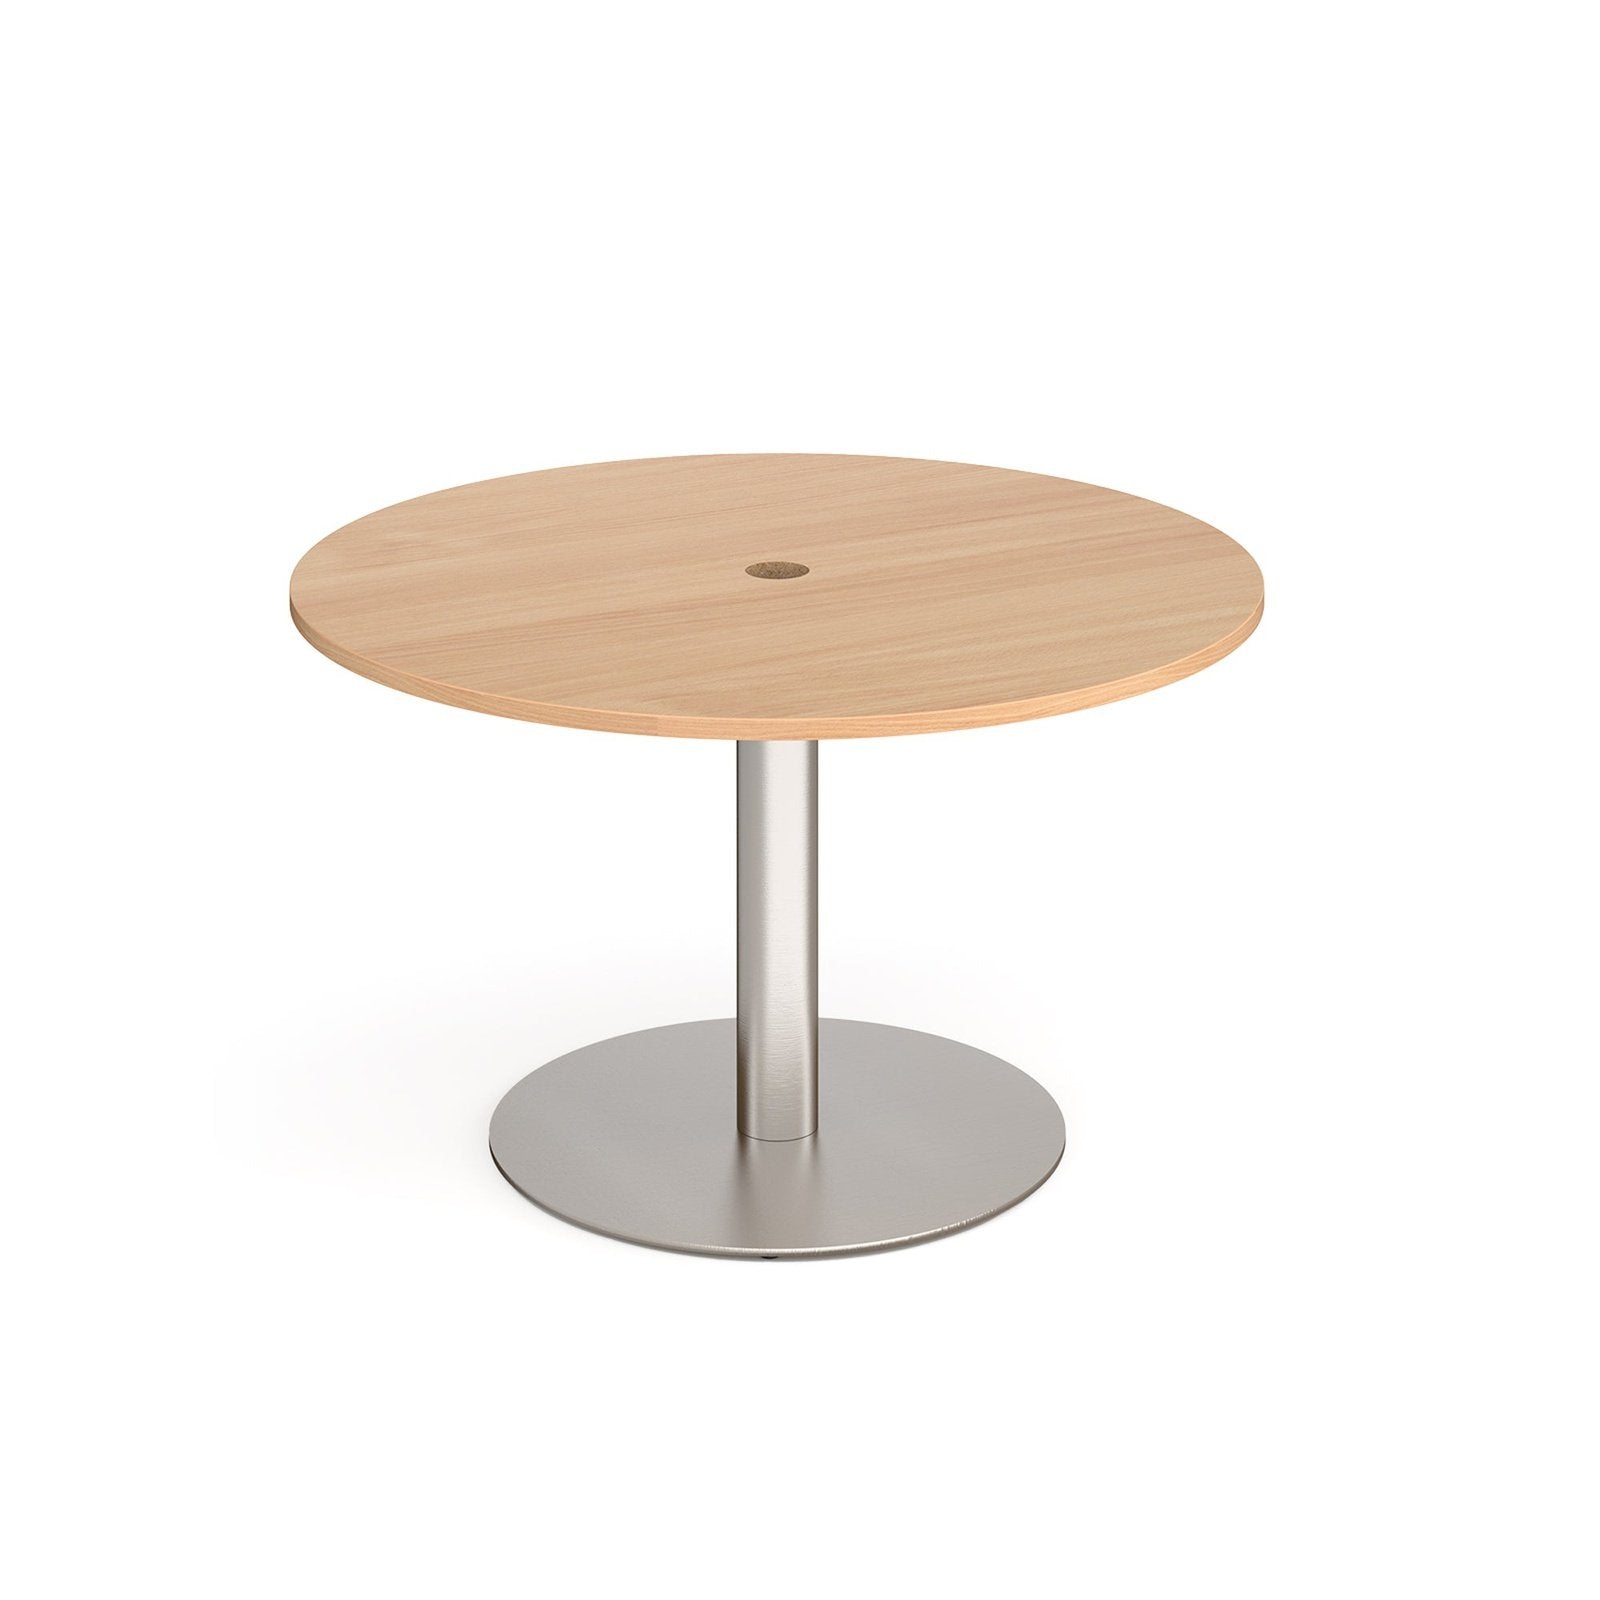 Eternal meeting with central circular cutout - Office Products Online